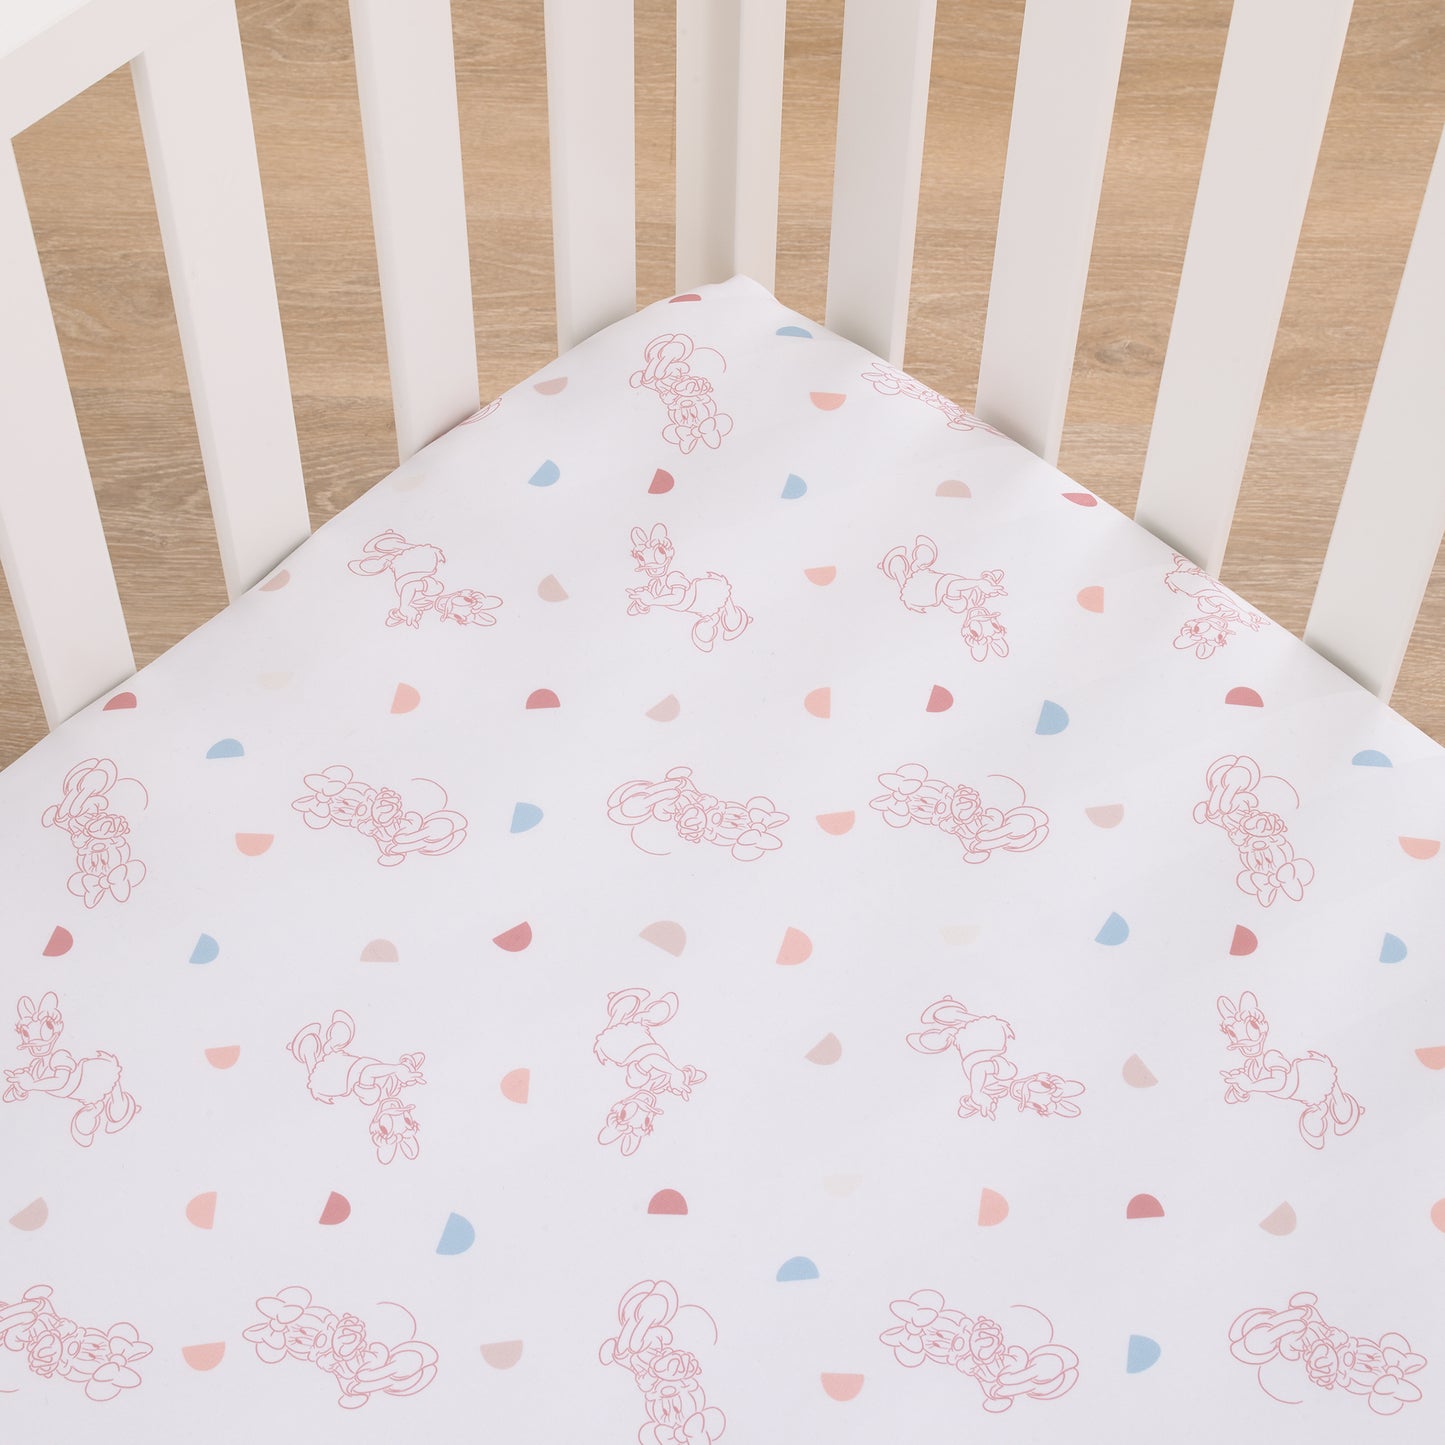 Disney Minnie Mouse White, Light Blue, and Peach with Daisy Duck Super Soft Nursery Fitted Crib Sheet